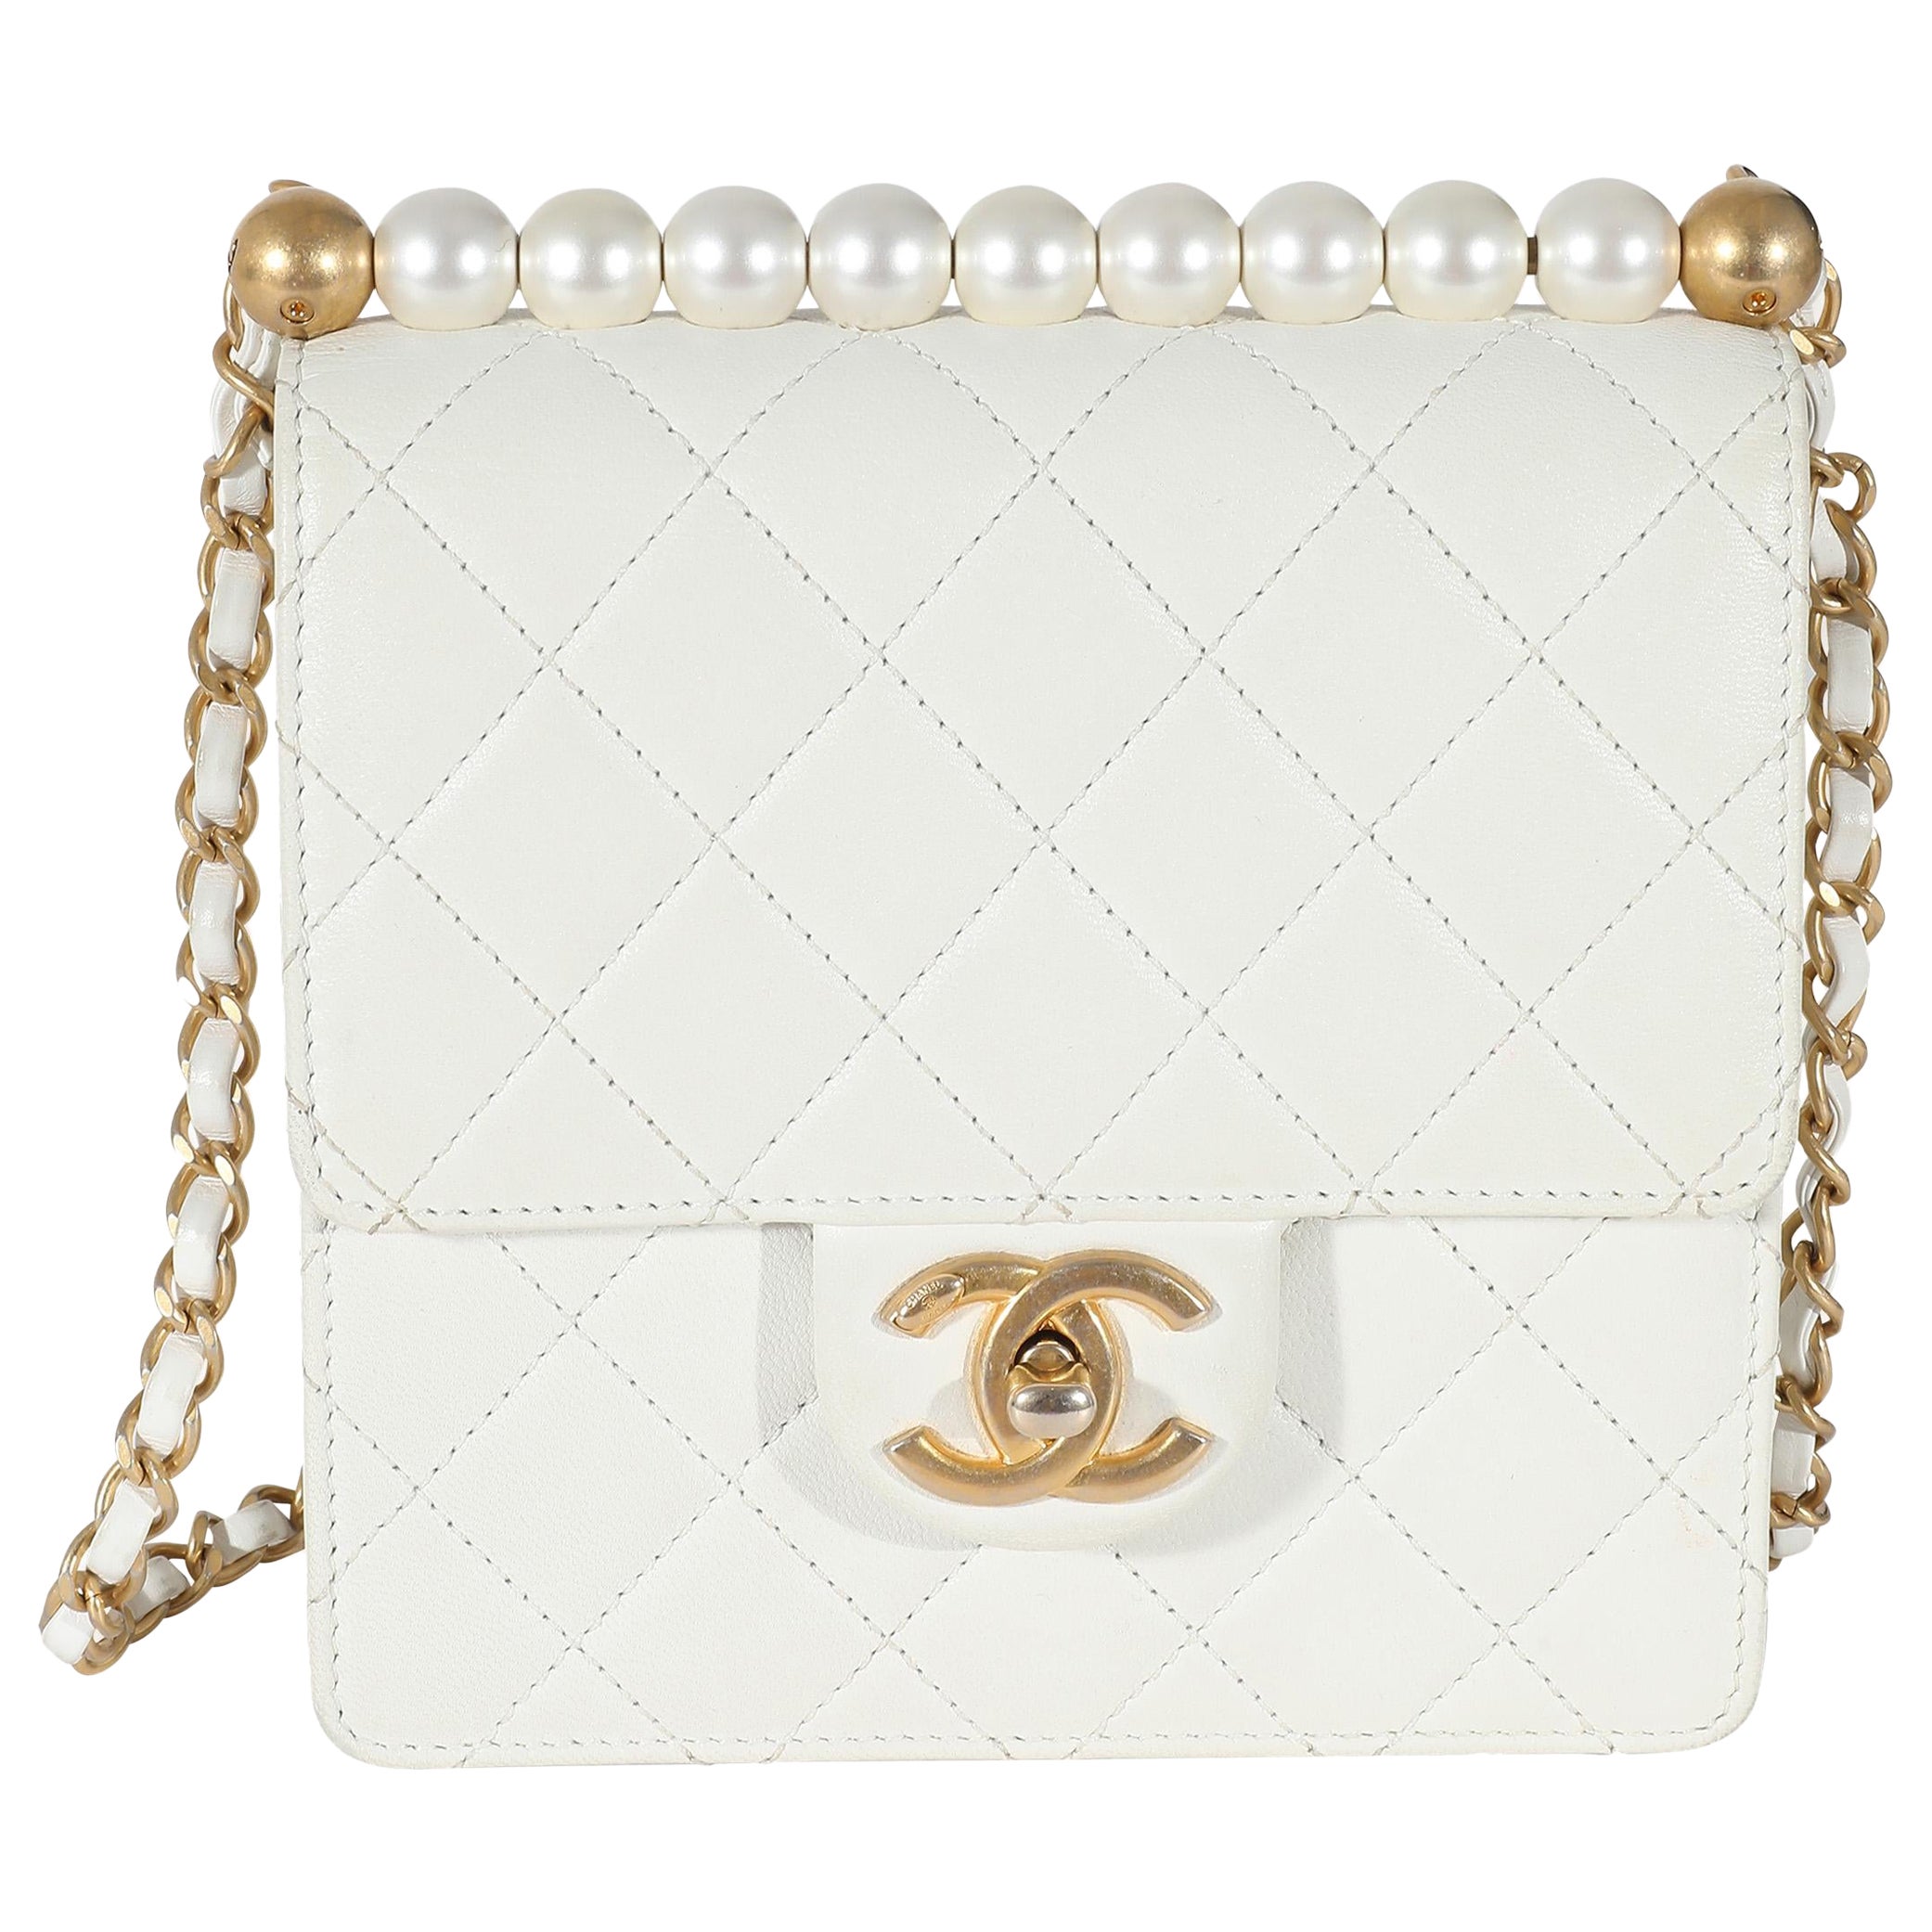 Chanel Vertical Flap - 15 For Sale on 1stDibs